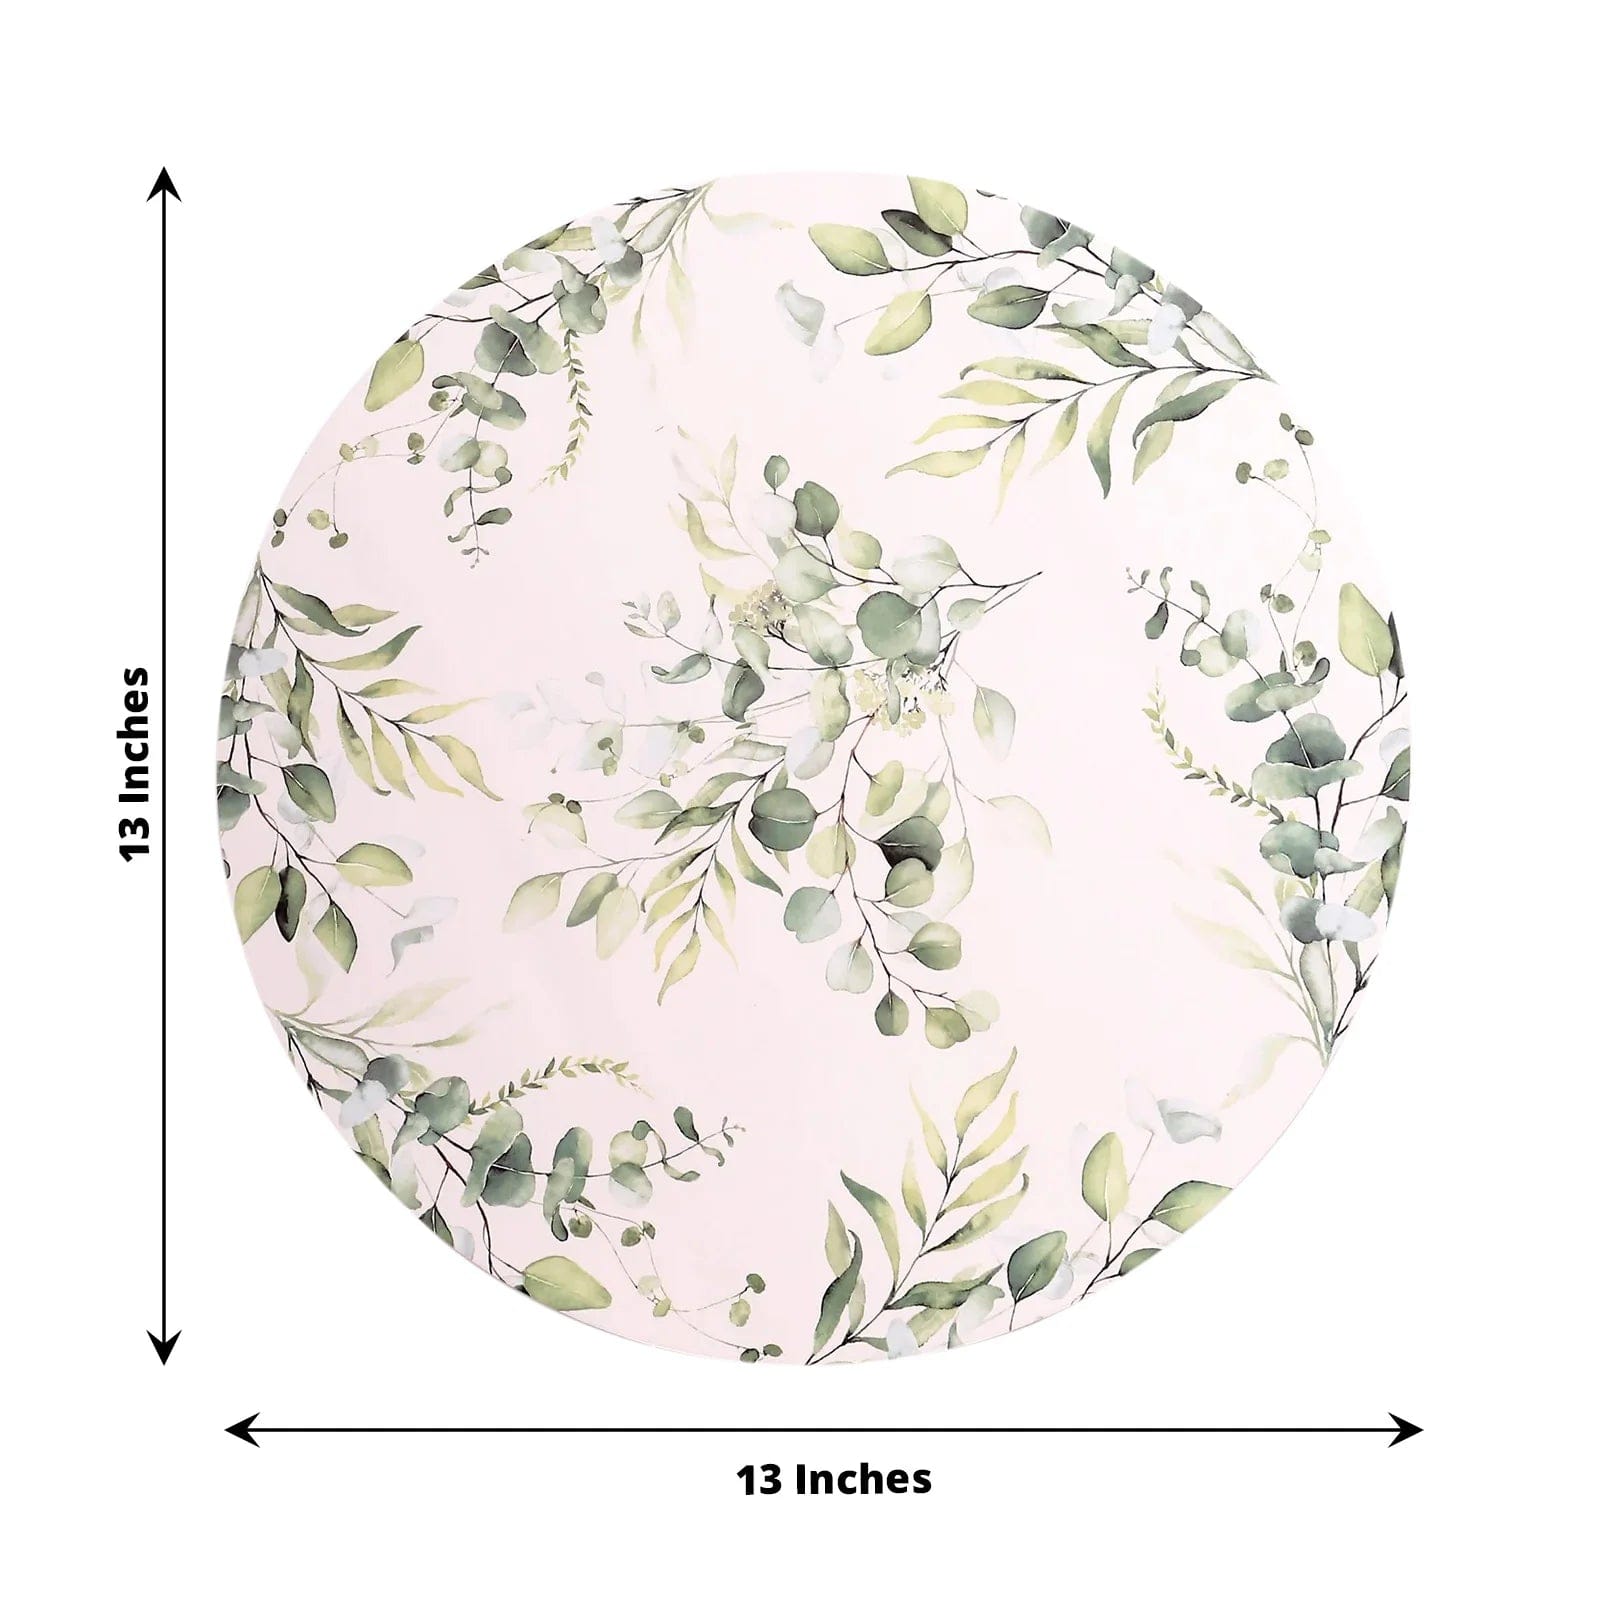 6 Round 13 in Disposable Paper Charger Plates with Floral Prints